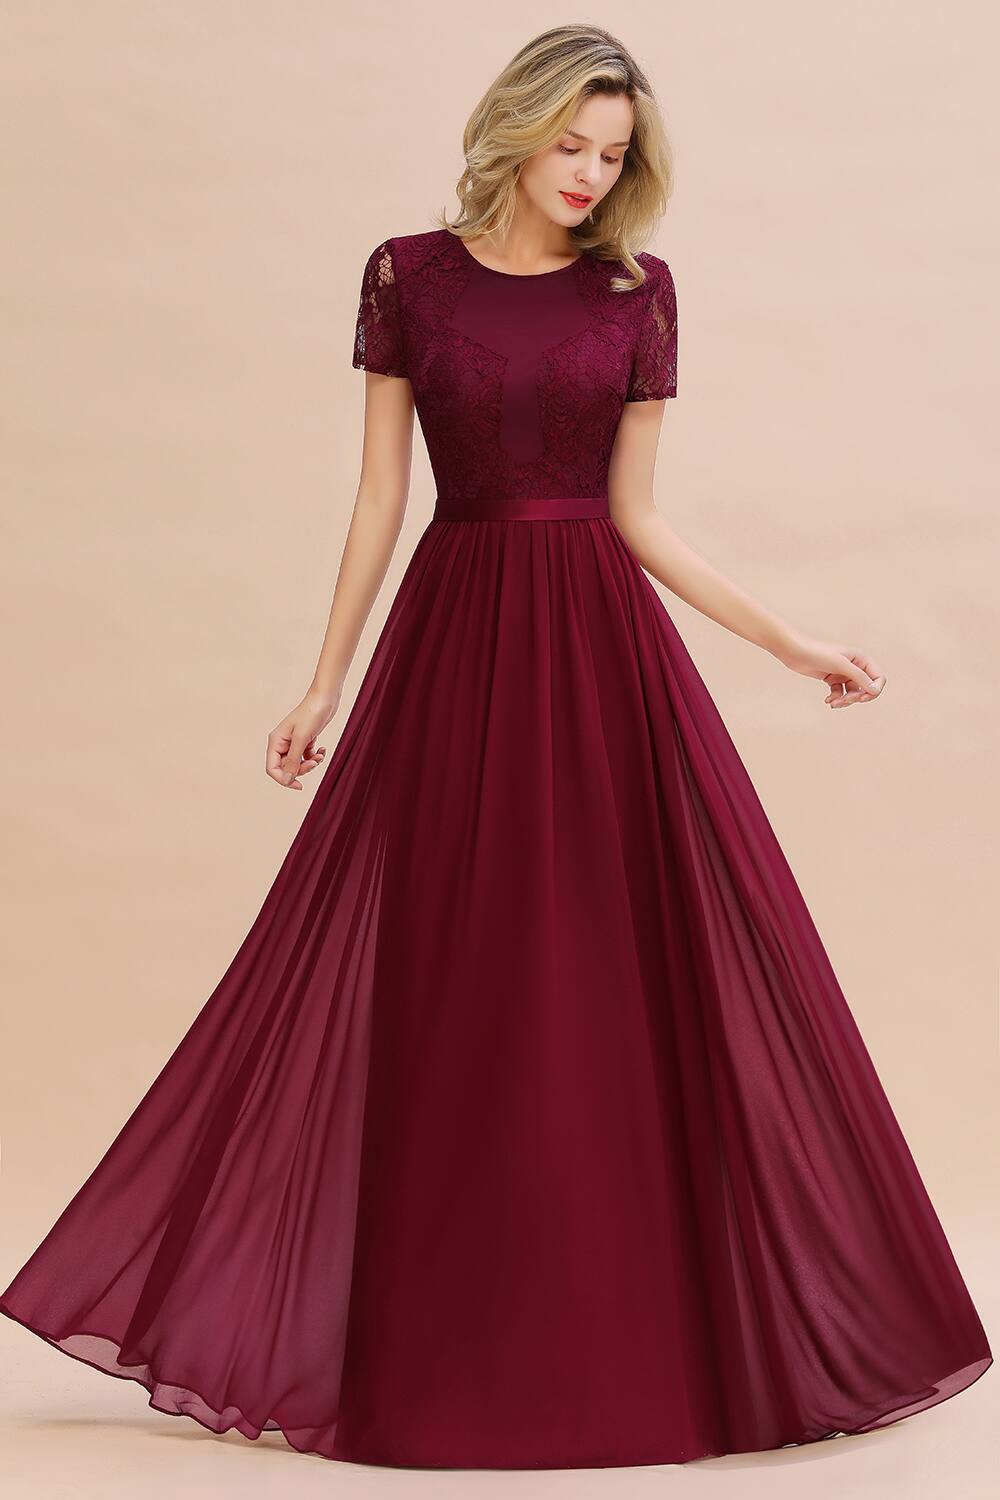 BMBridal $32.99 Christmas Party Dress + Free Shipping